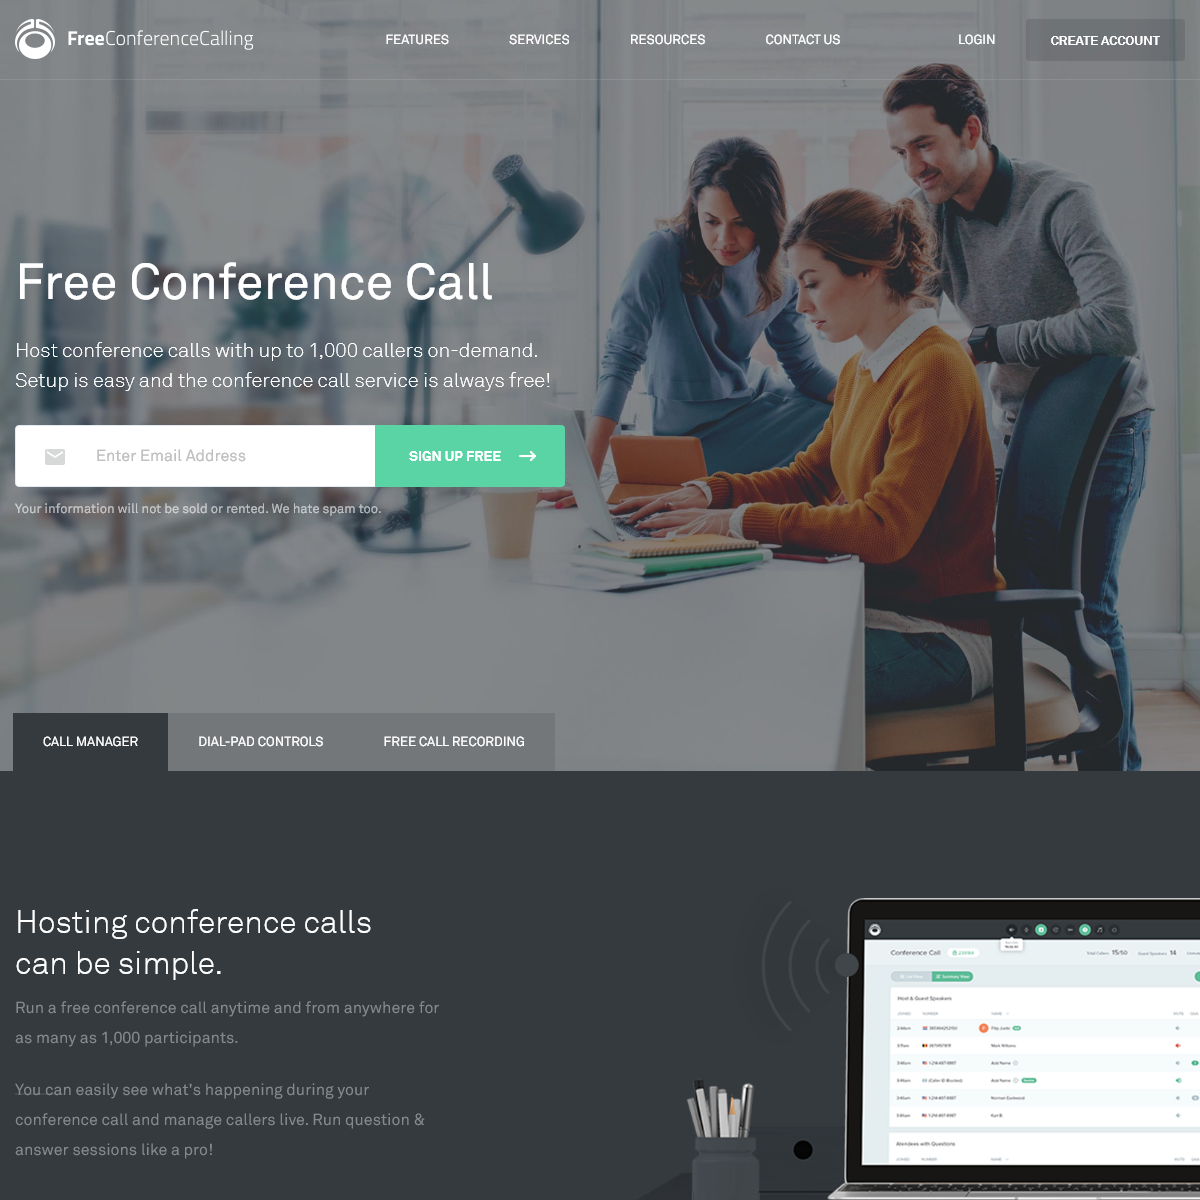 A complete backup of freeconferencecalling.com